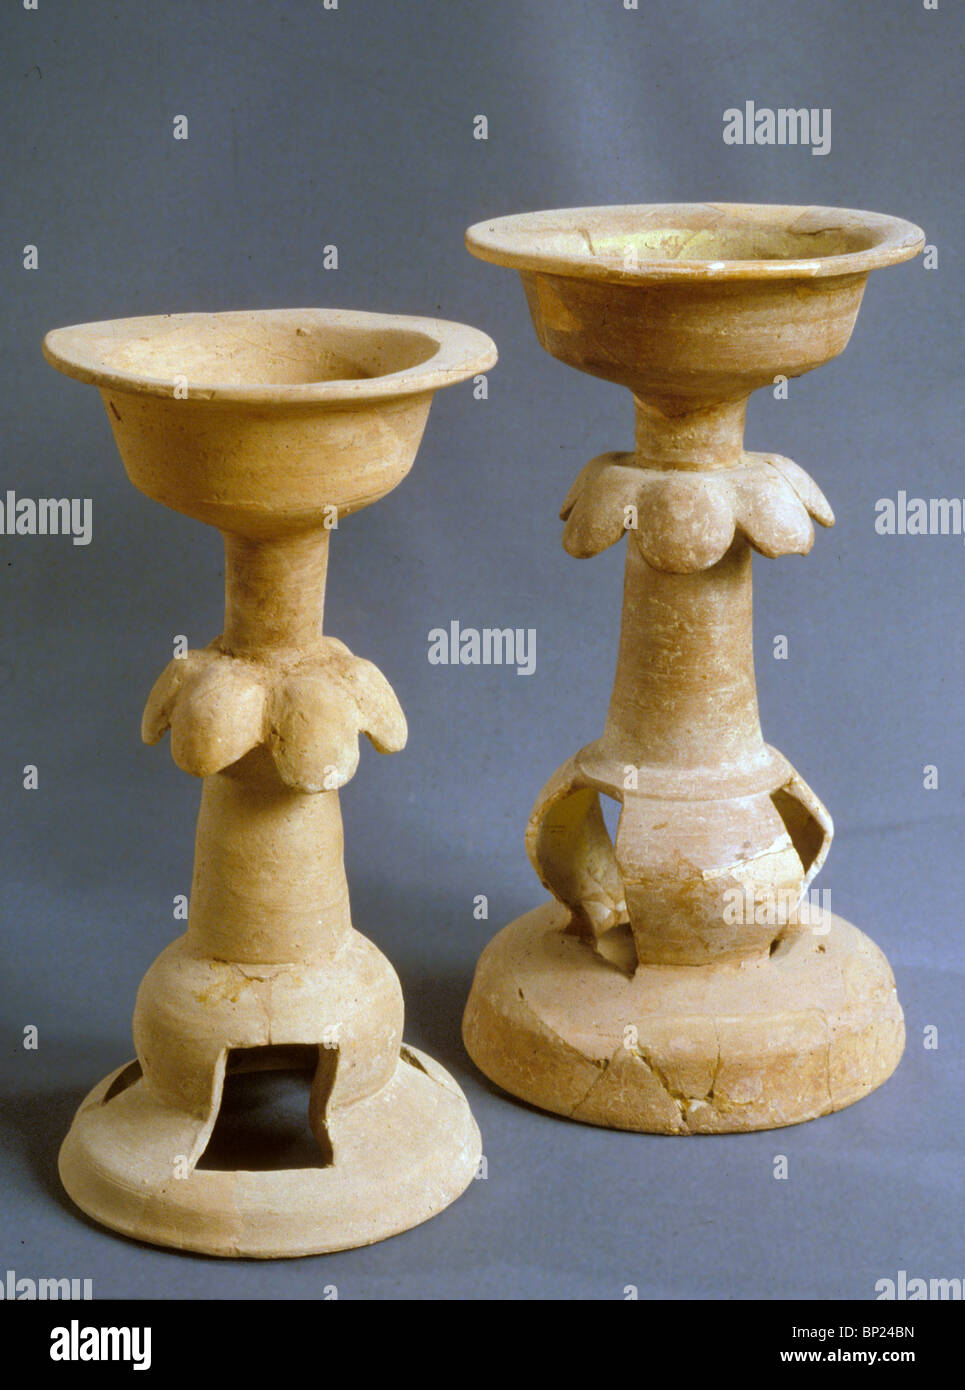 487. CLAY INCENSE BURNING STANDS. CNAANITE PERIOD, C. 10TH. C. BC. Stock Photo